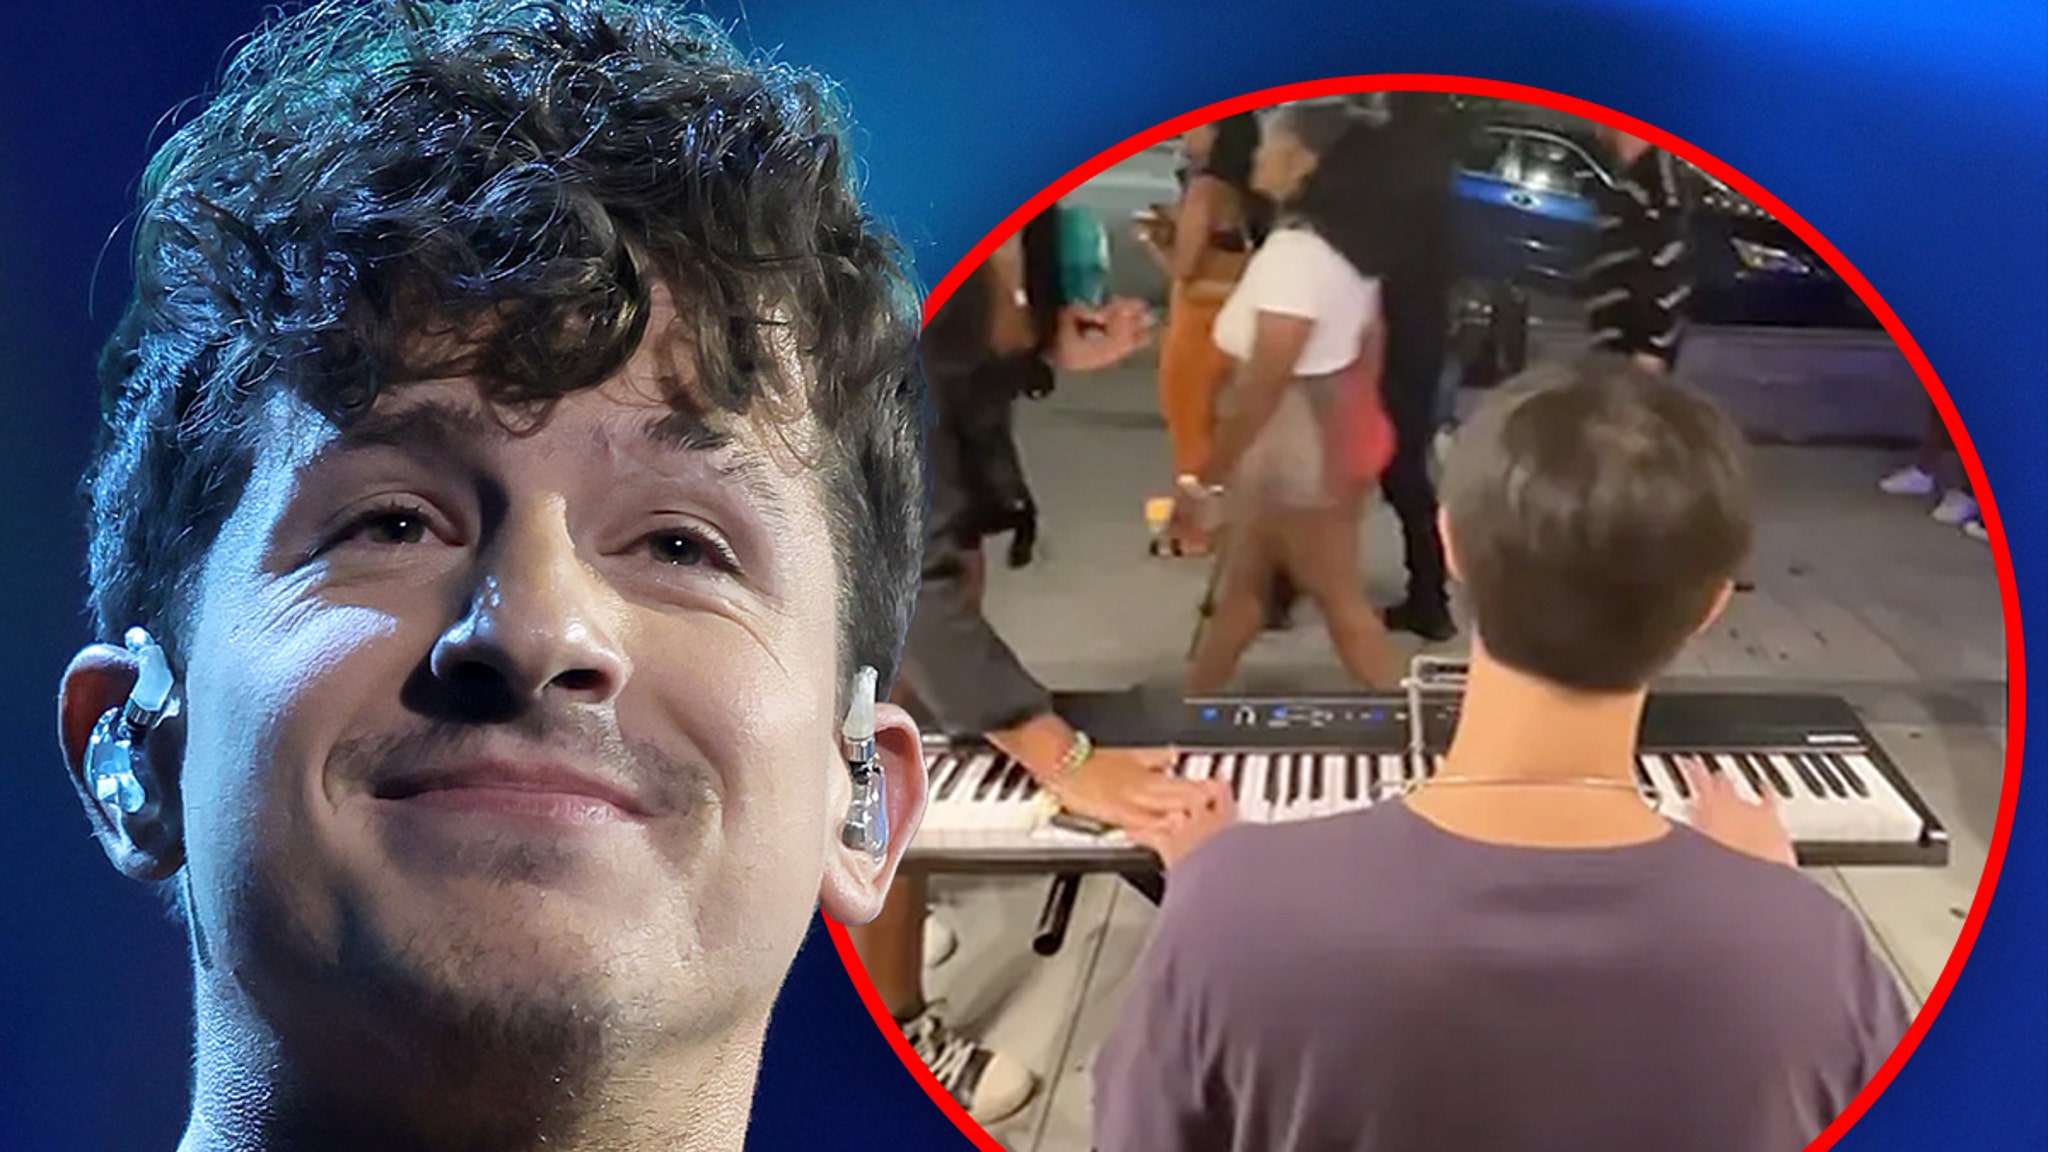 Charlie Puth Encourages Street Performer From Piano Smash, Invites Him to Show